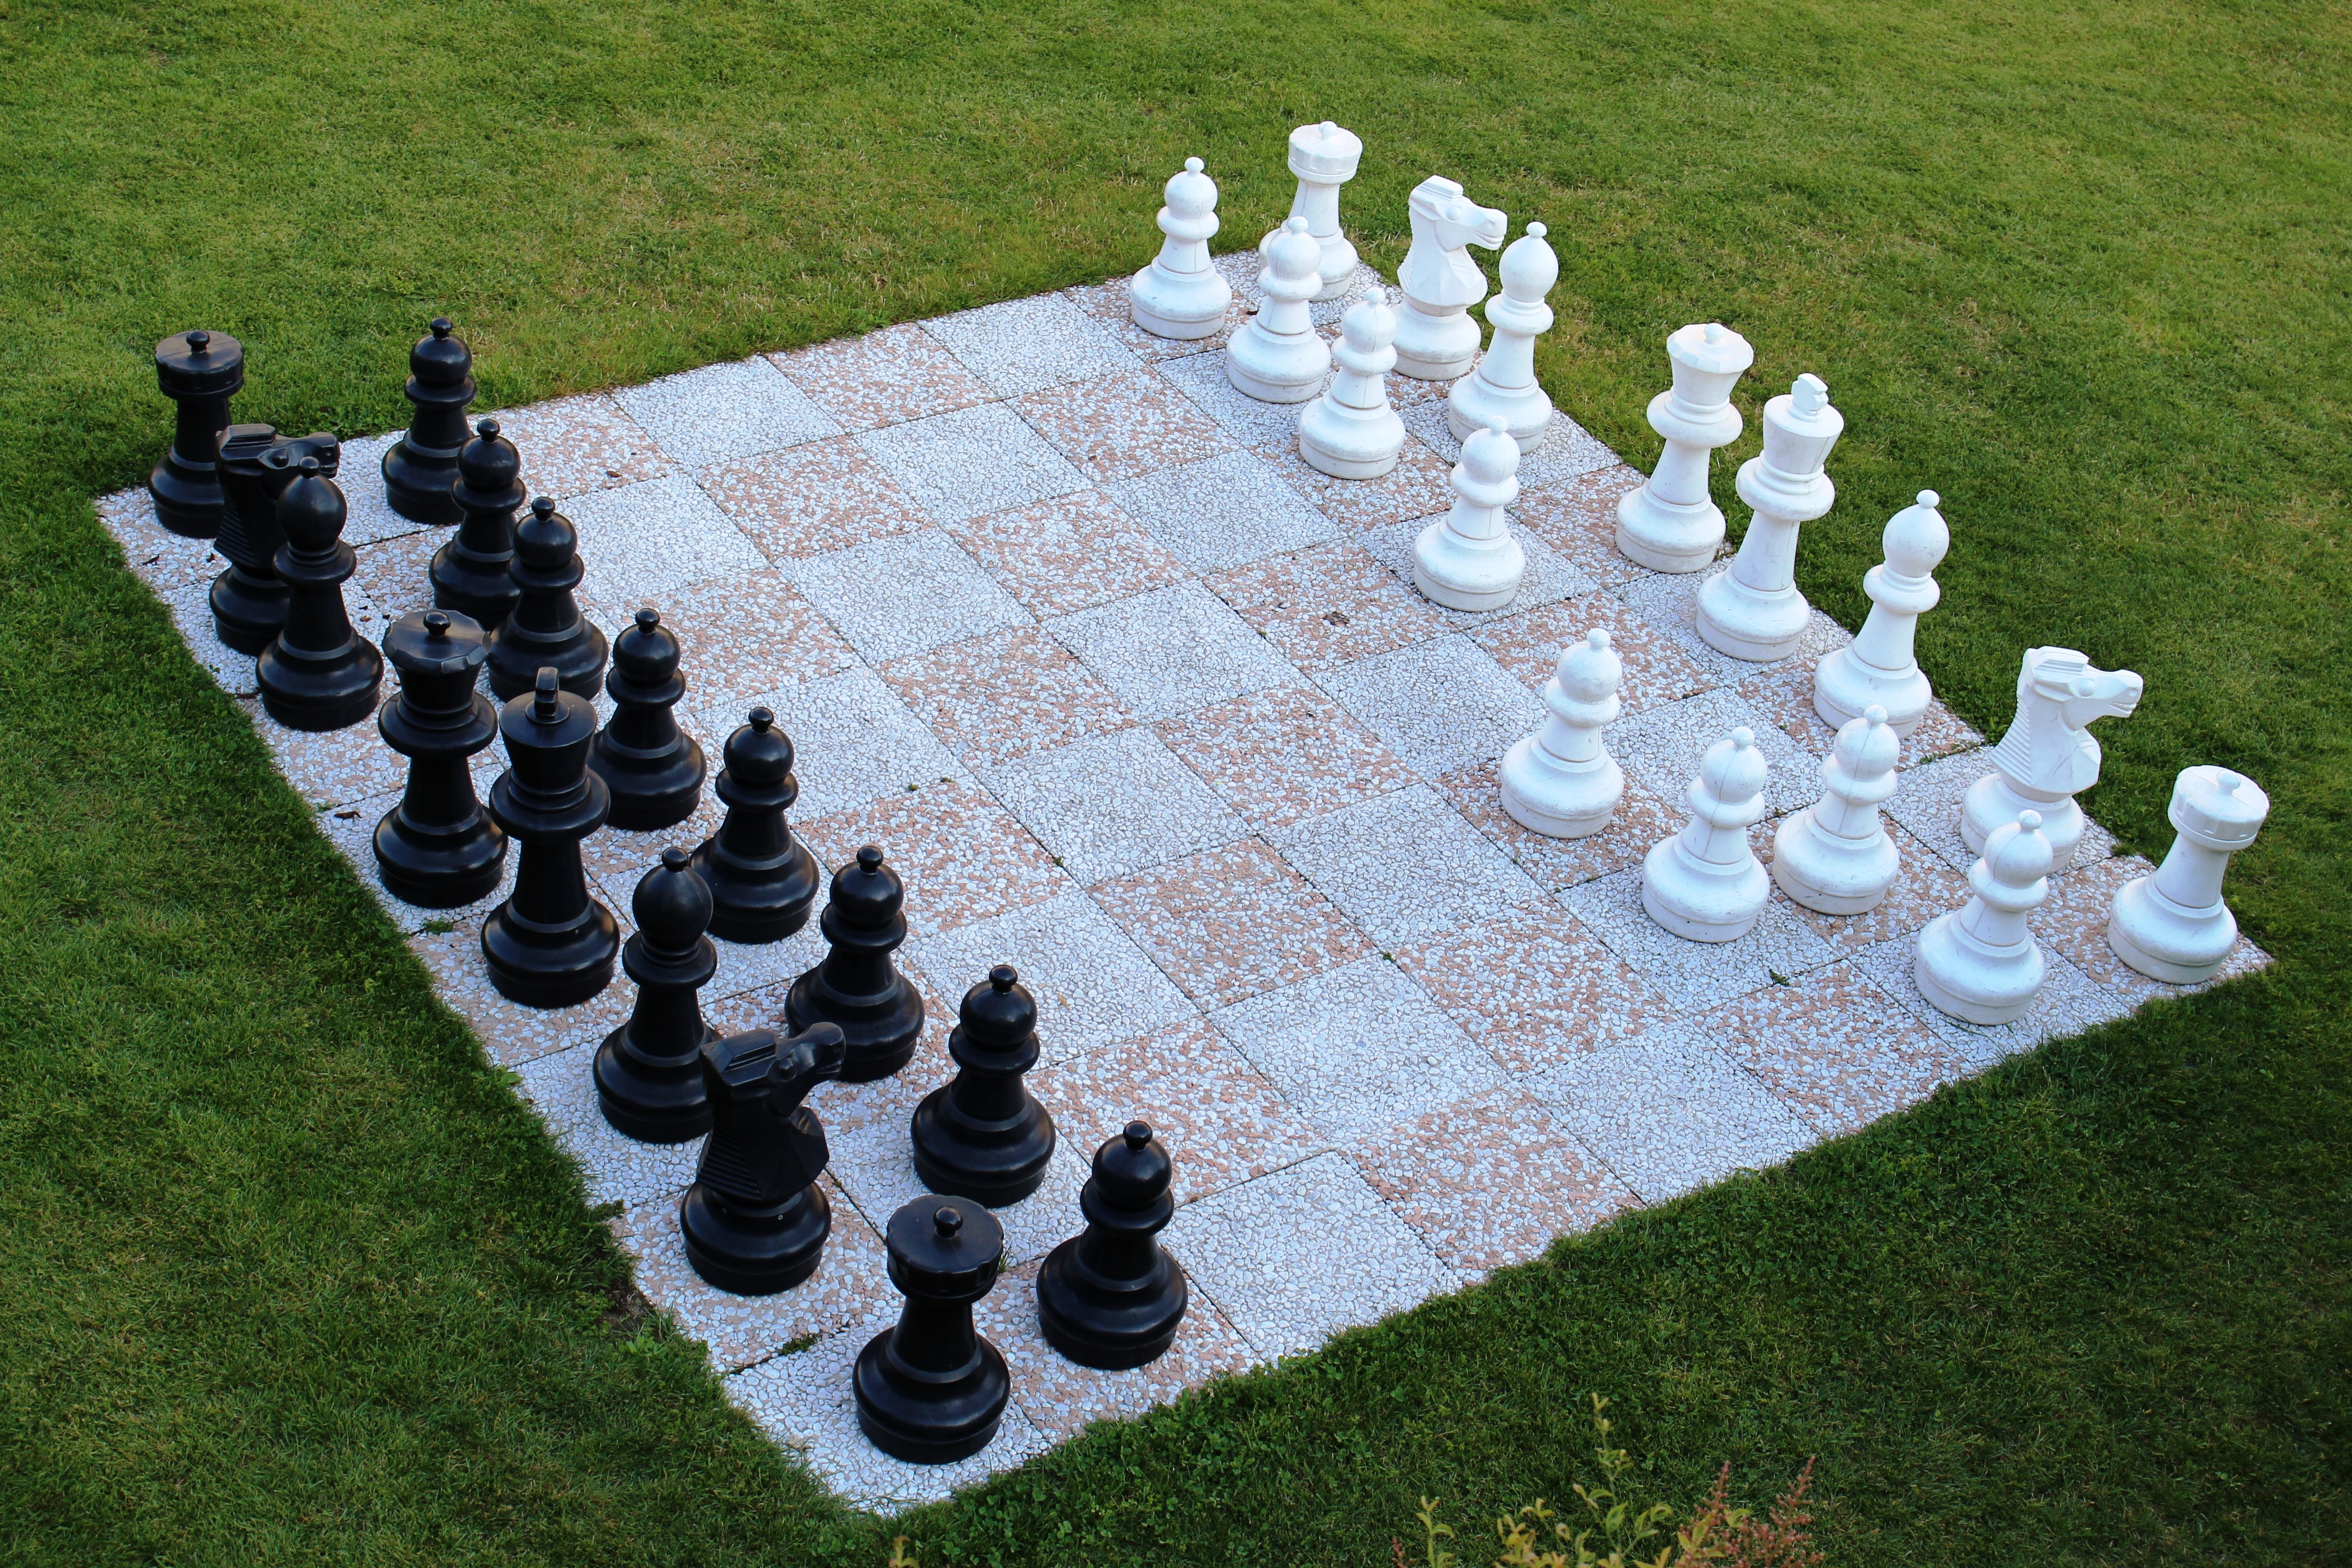 chessboard set on field of grass, chess game, garden chess, chess pieces